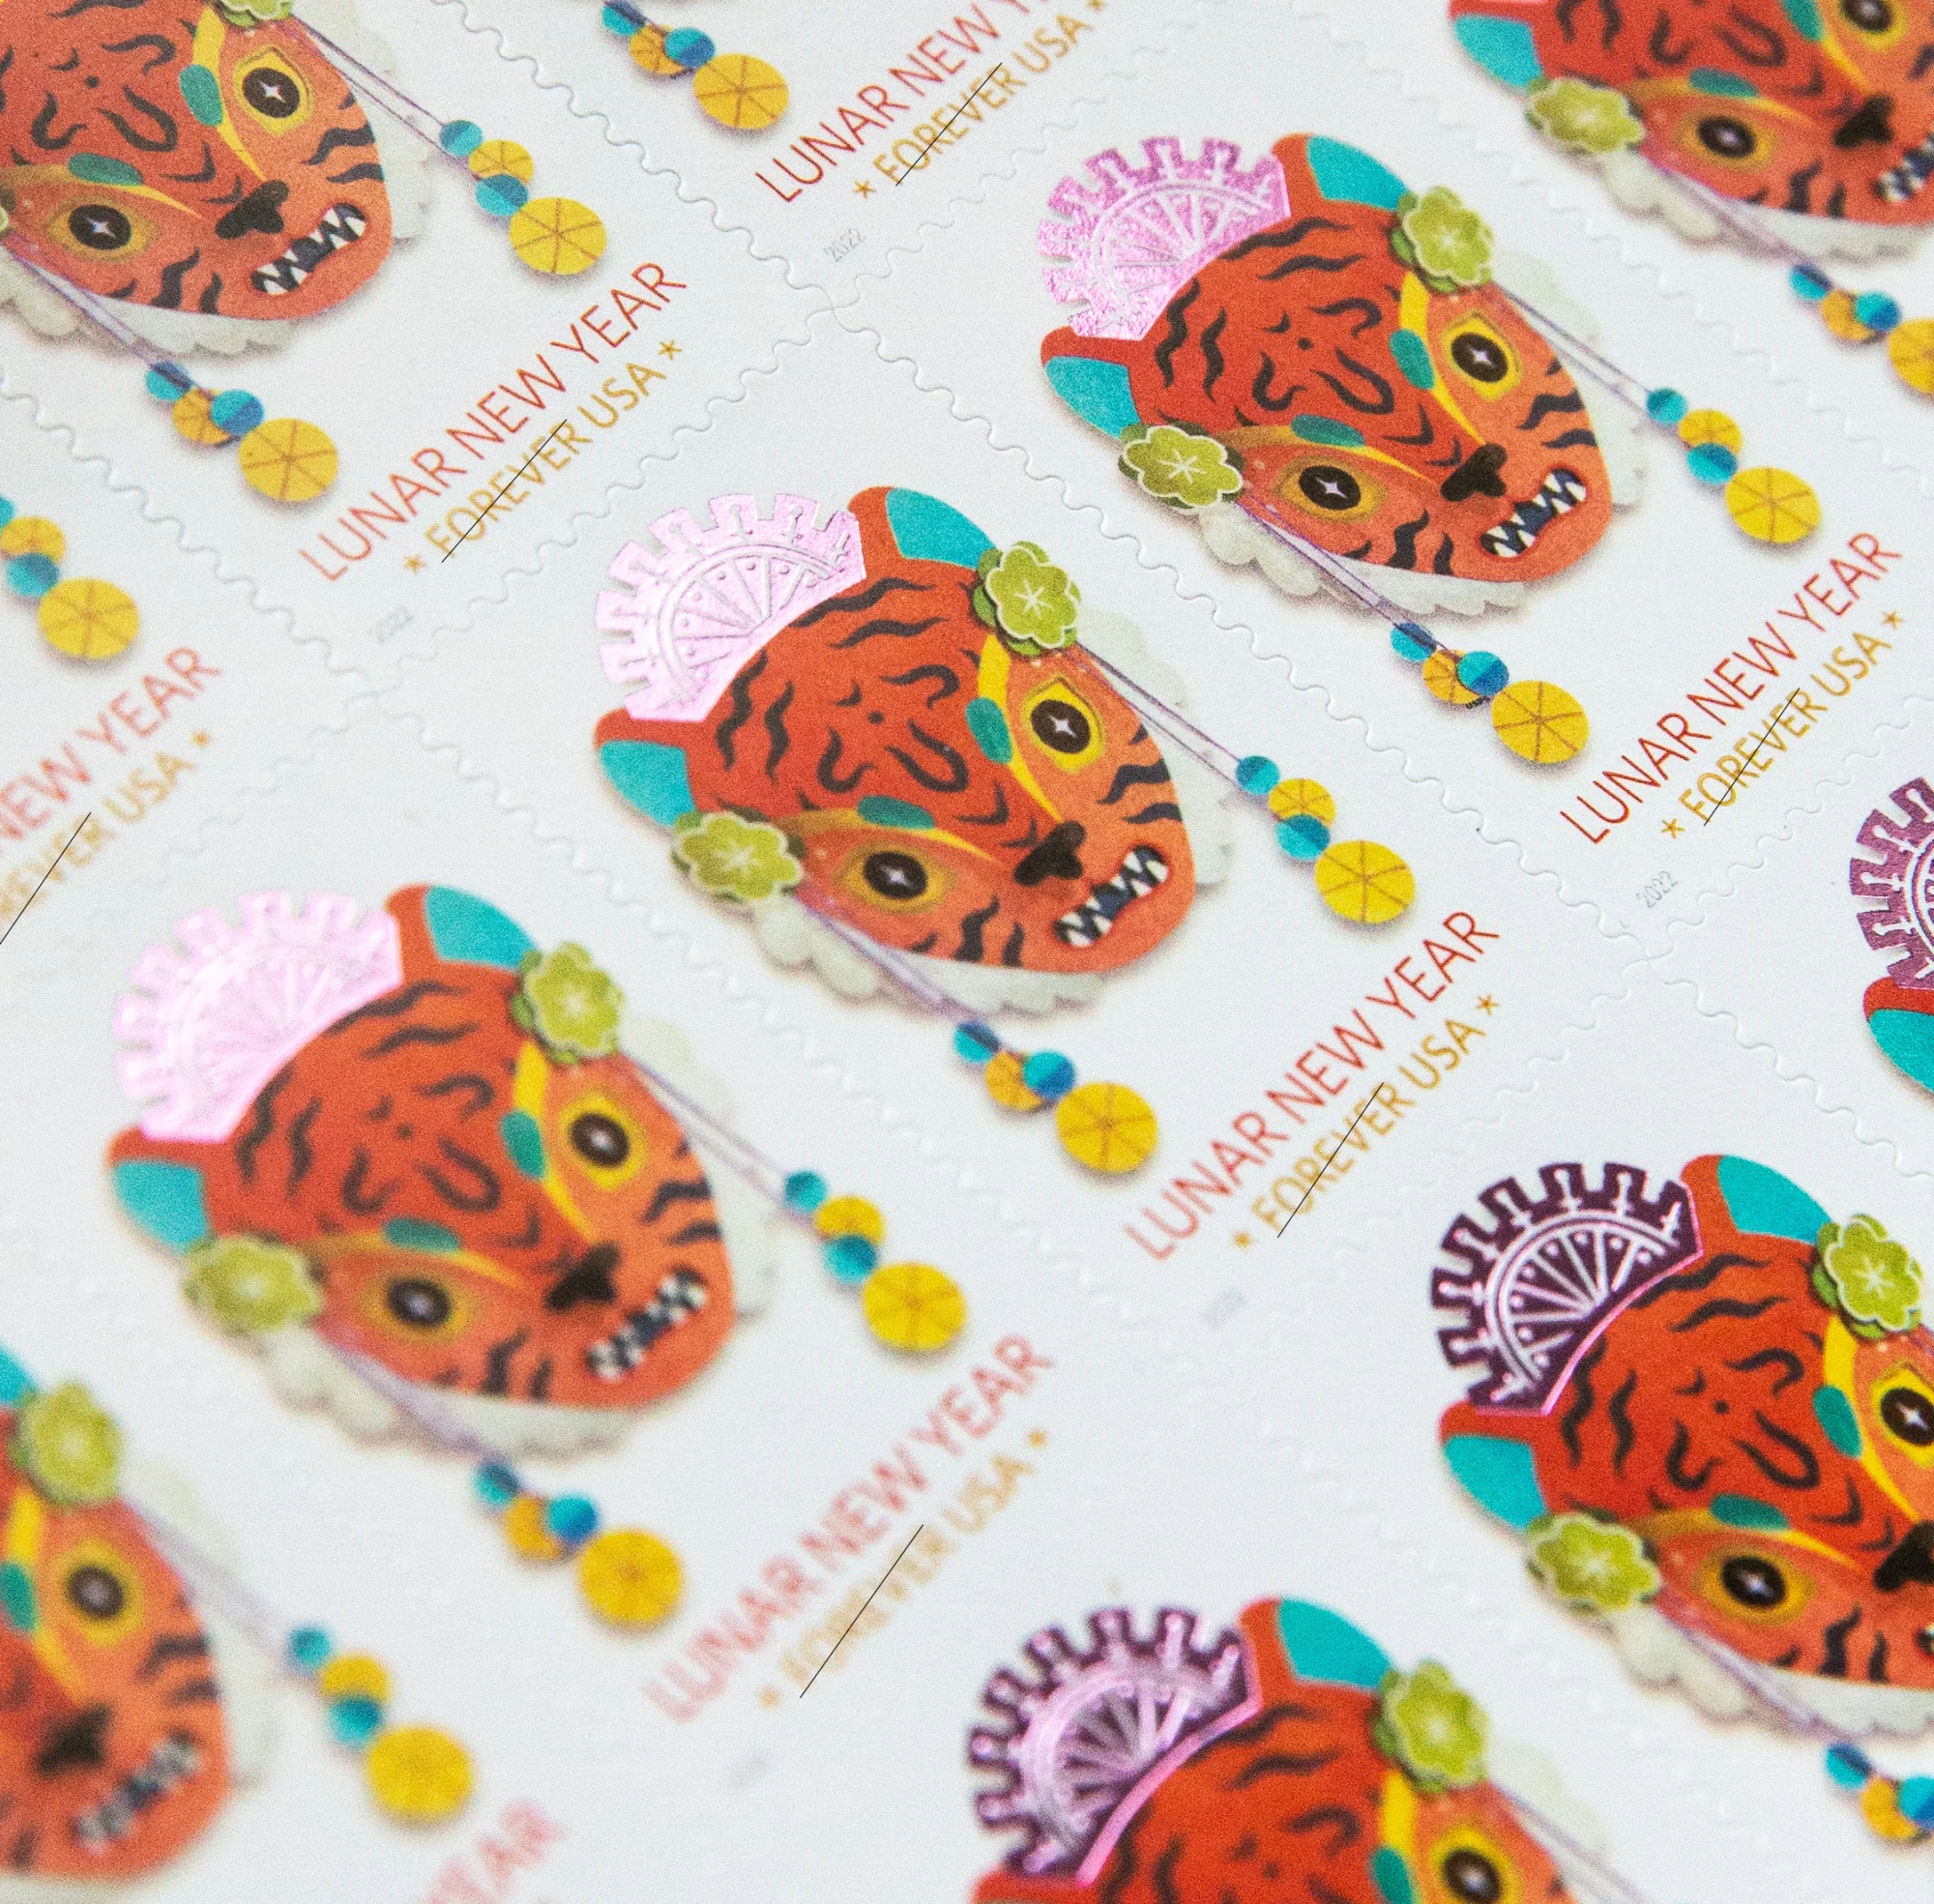 Tiger Stamps Are Here to Stay!*